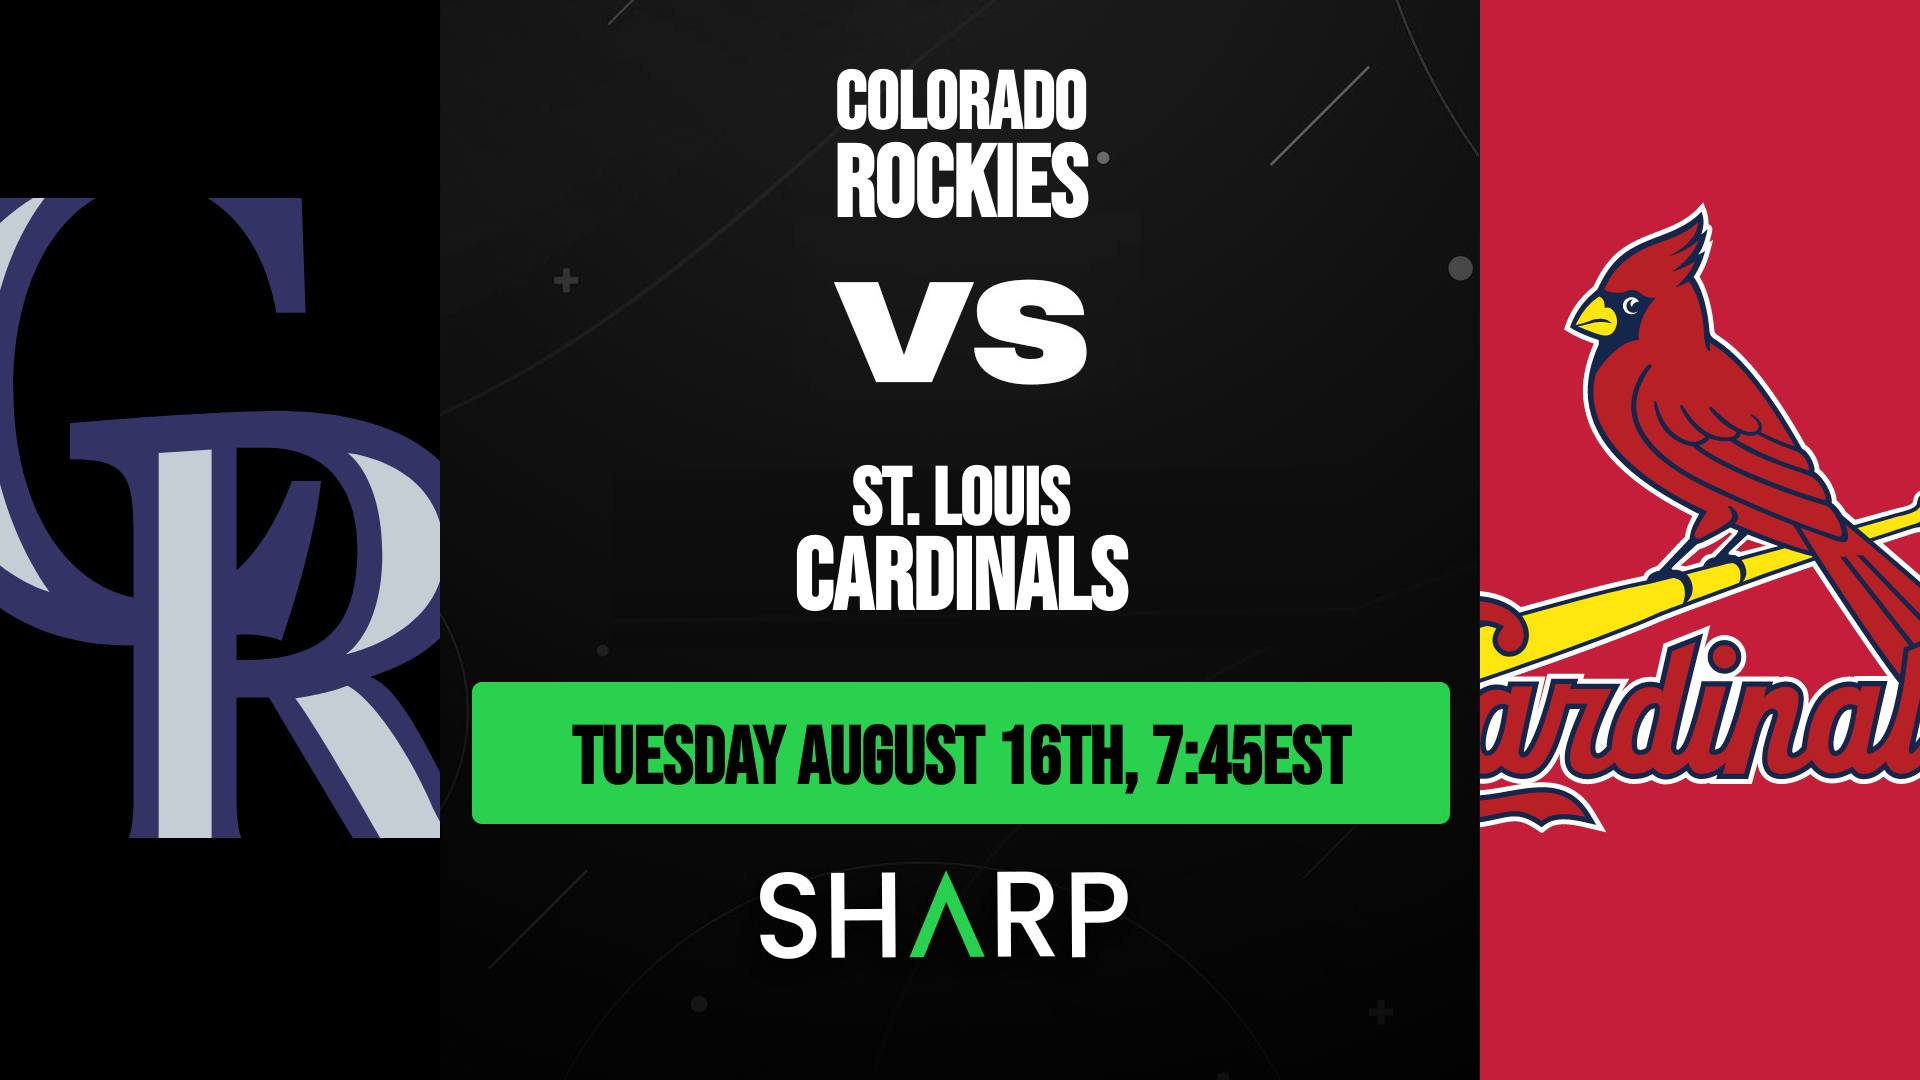 Colorado Rockies @ St. Louis Cardinals Matchup Preview - August 16th, 2022